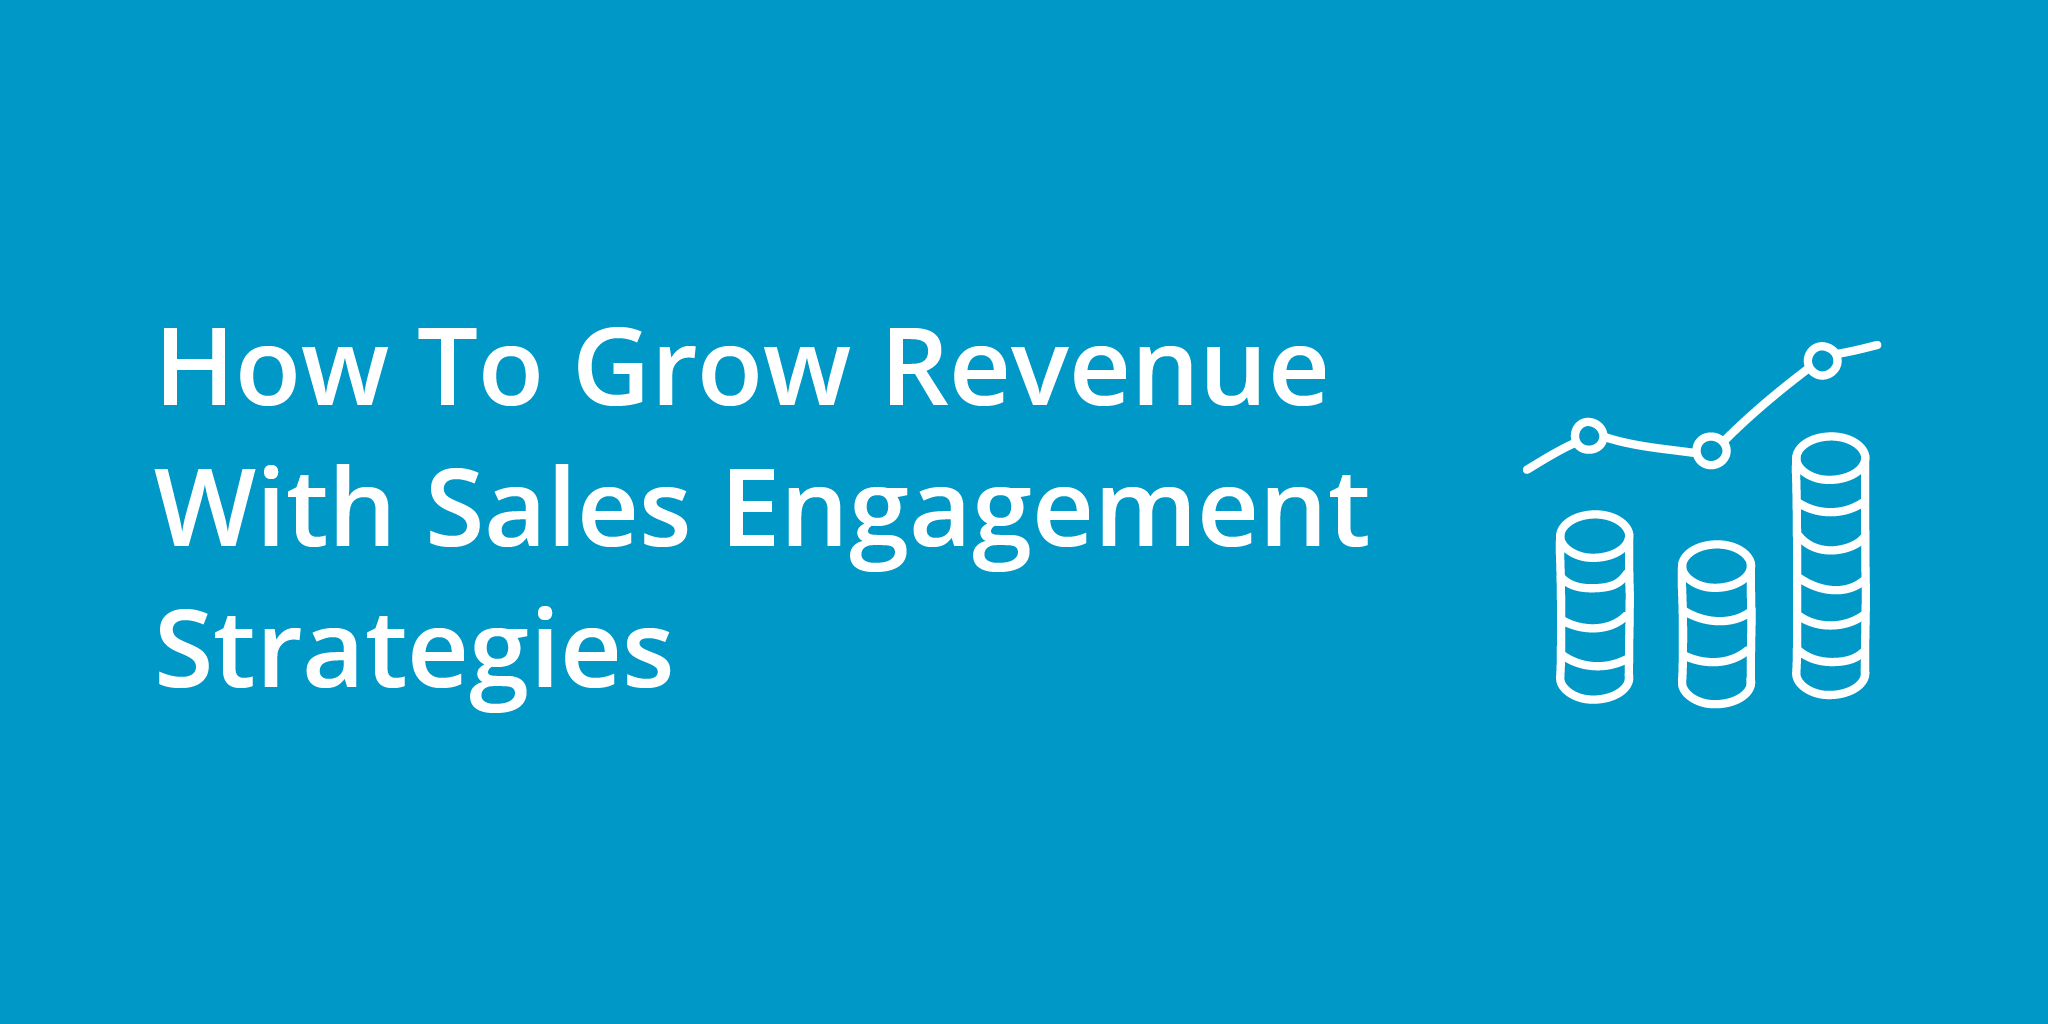 How To Grow Revenue With Sales Engagement Strategies | Telephones for business